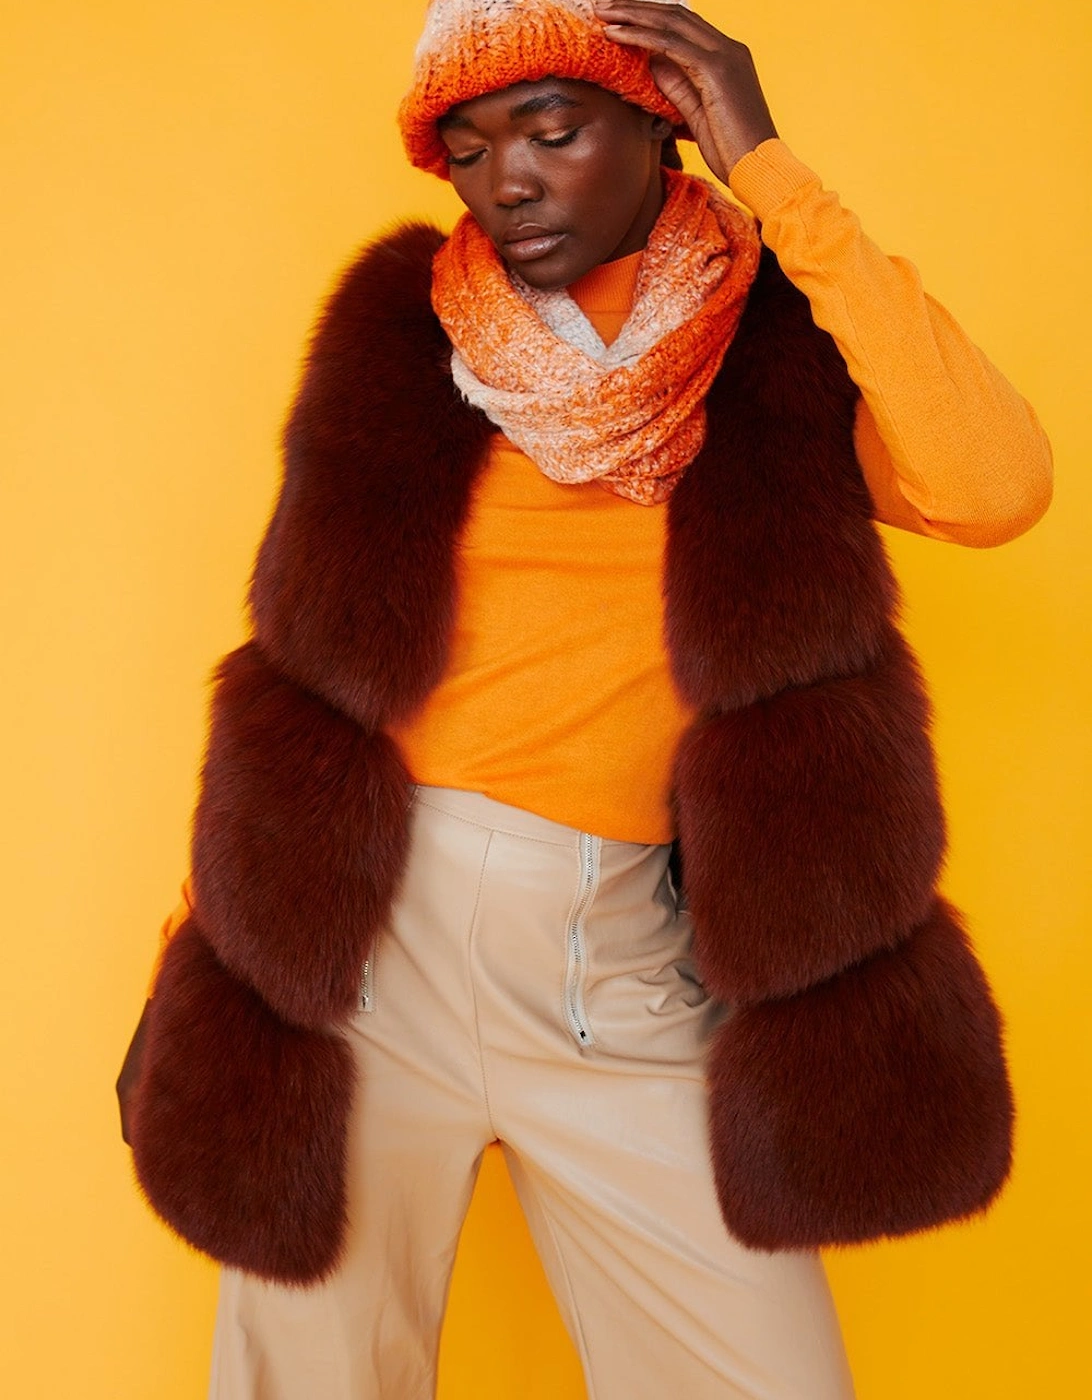 Handmade Knitted Wooly Scarf and Hat Set in Orange and White